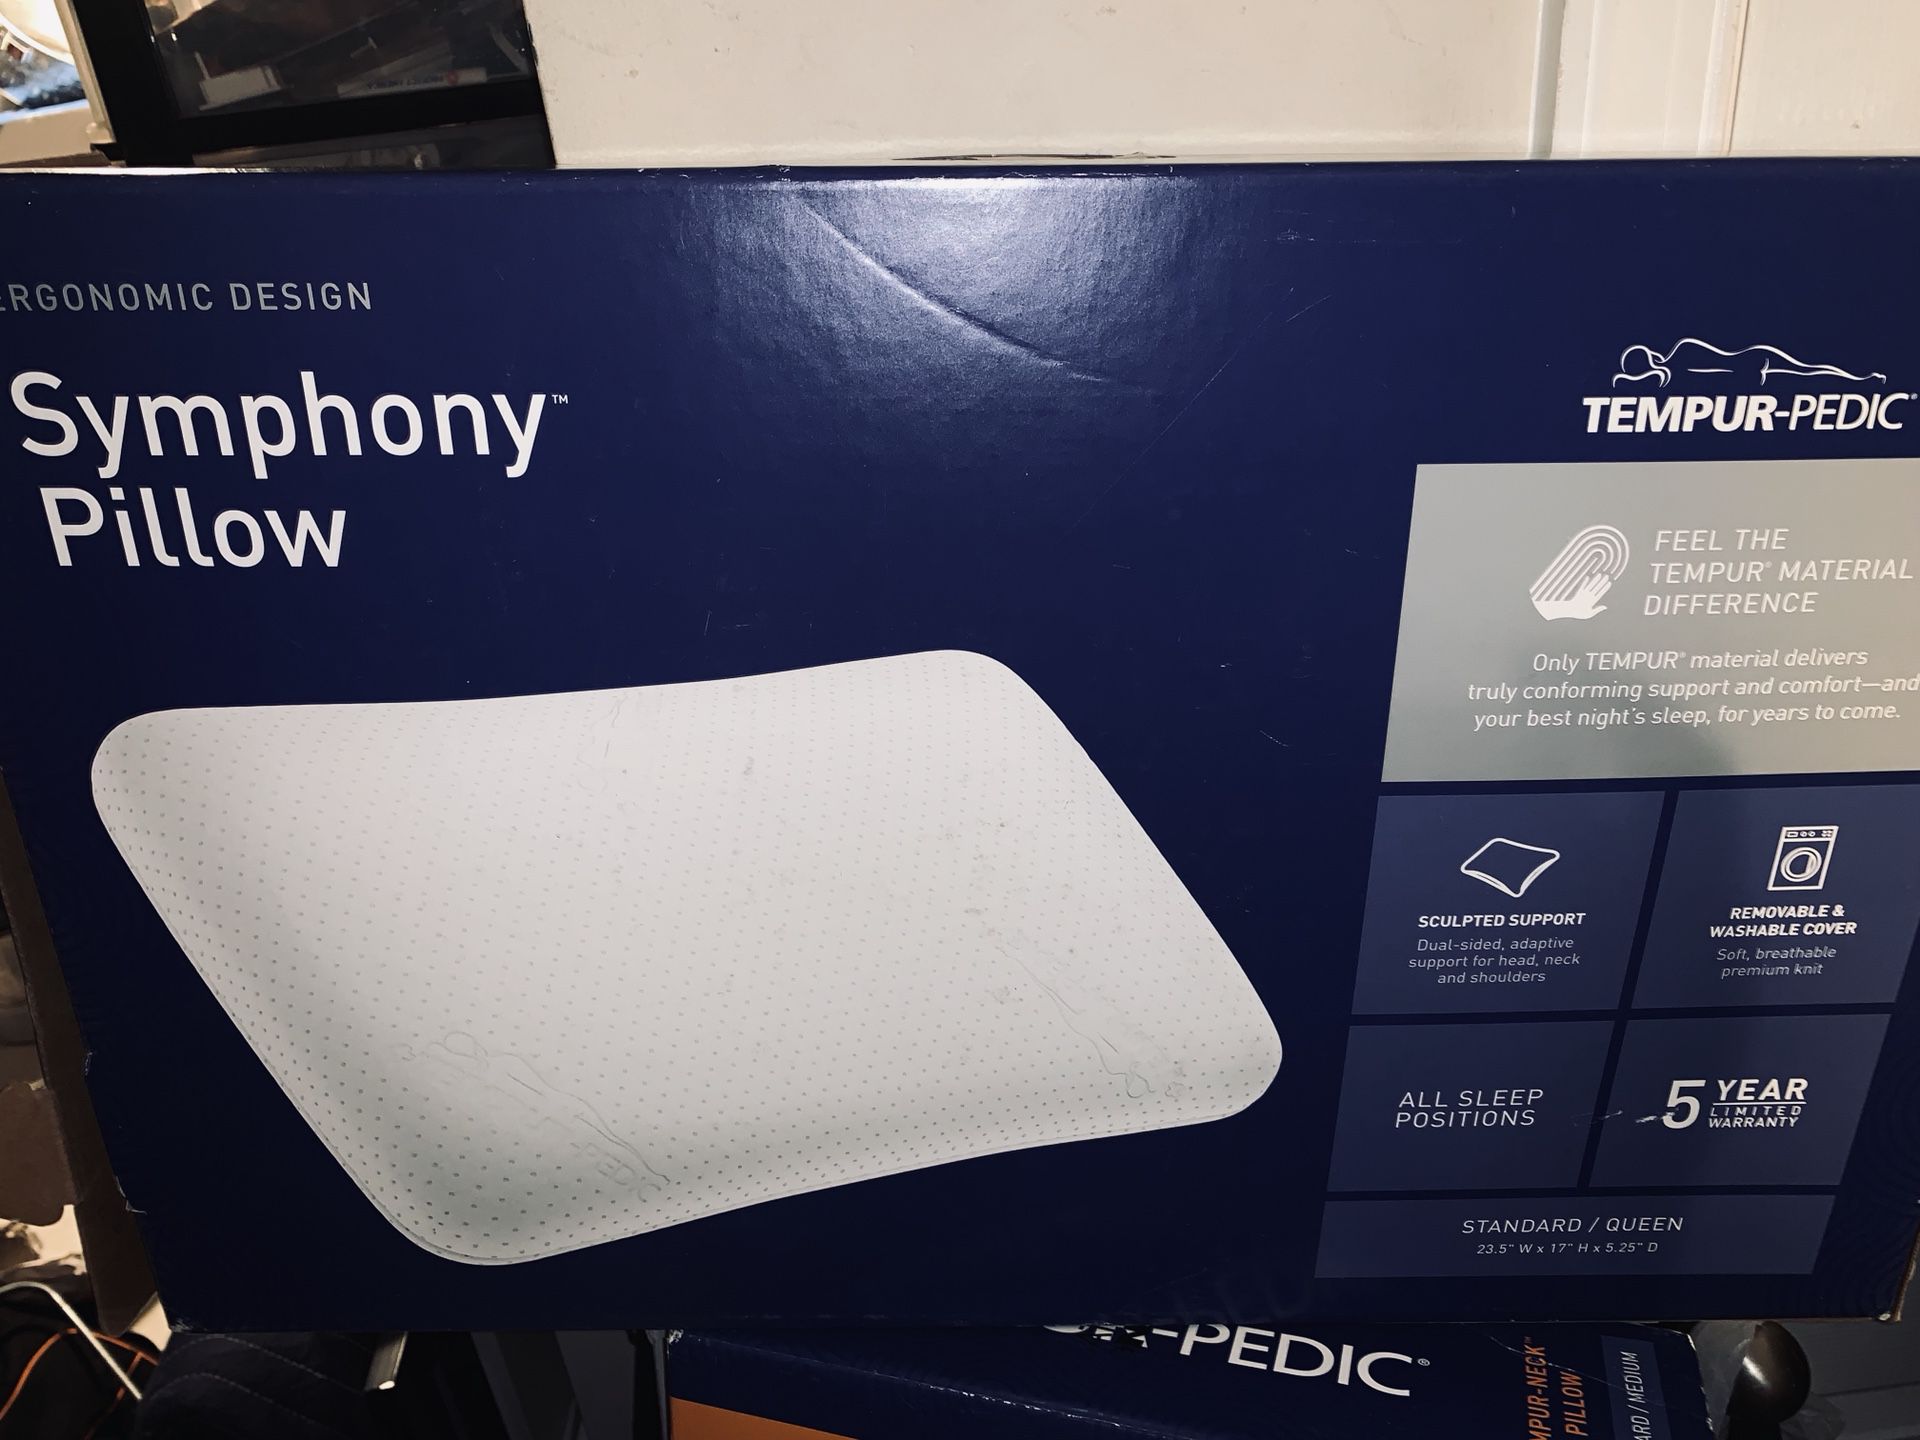 THE NECK PILLOW BY TEMPUR-PEDIC (PILLOW) Tempur-Pedic TEMPUR-Ergo Neck Large Size, Firm Support, Adaptable Comfort & Relief pillow, White